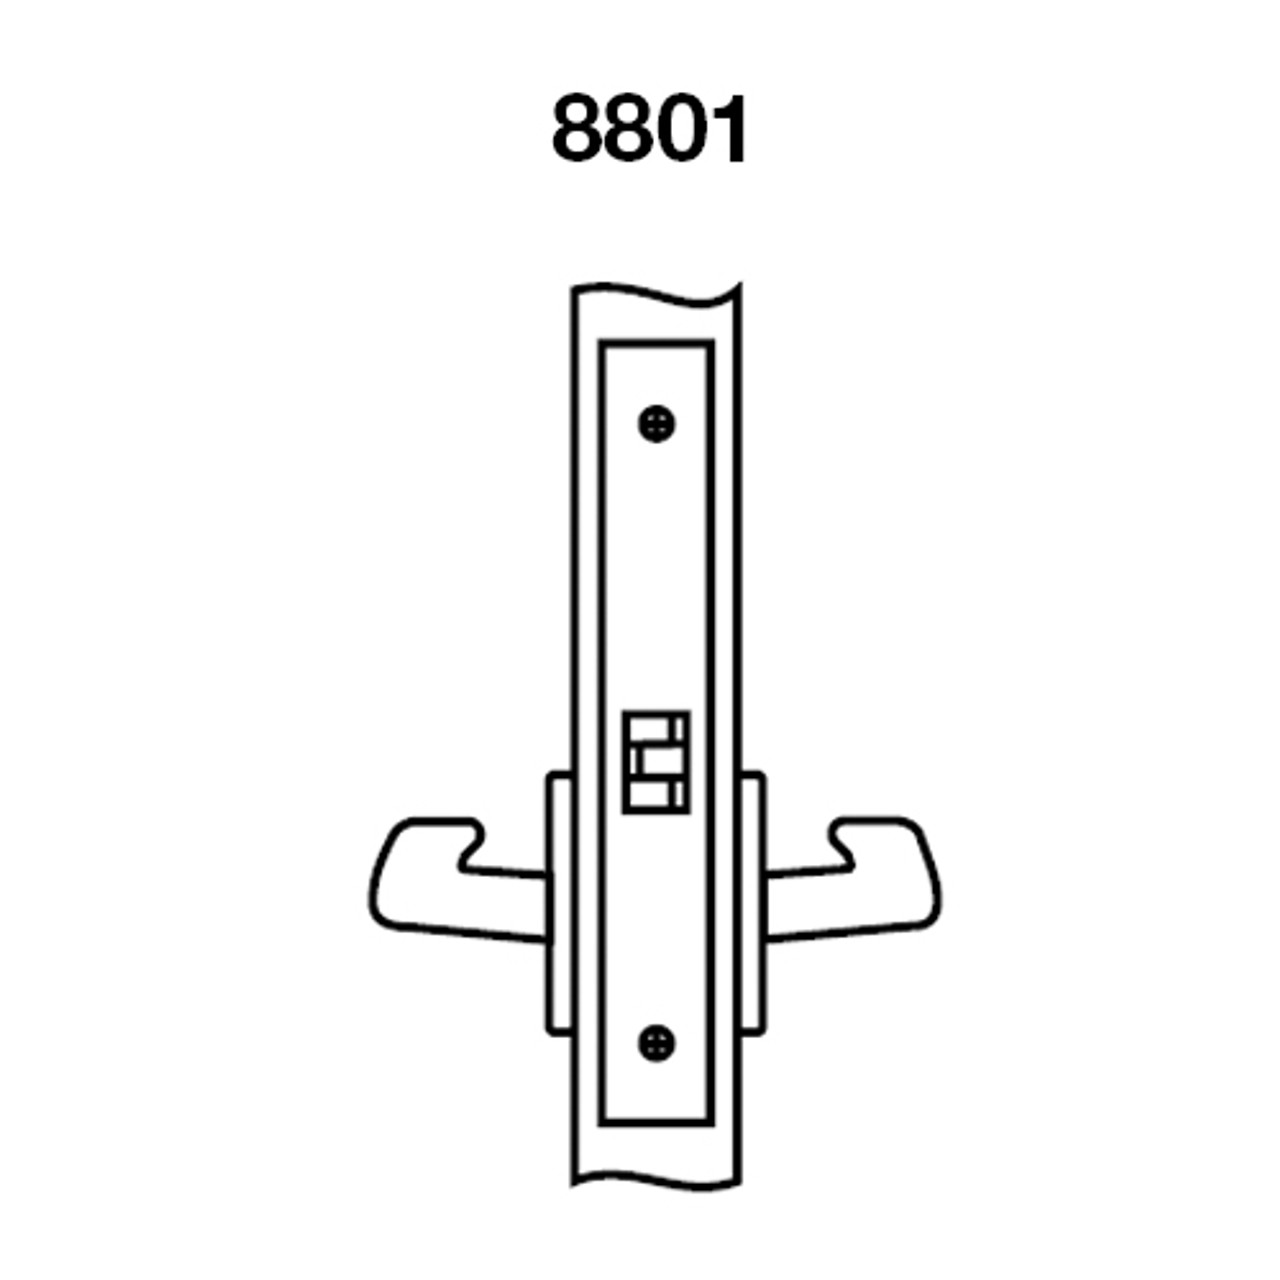 CRCN8801FL-625 Yale 8800FL Series Non-Keyed Mortise Passage Locks with Carmel Lever in Bright Chrome